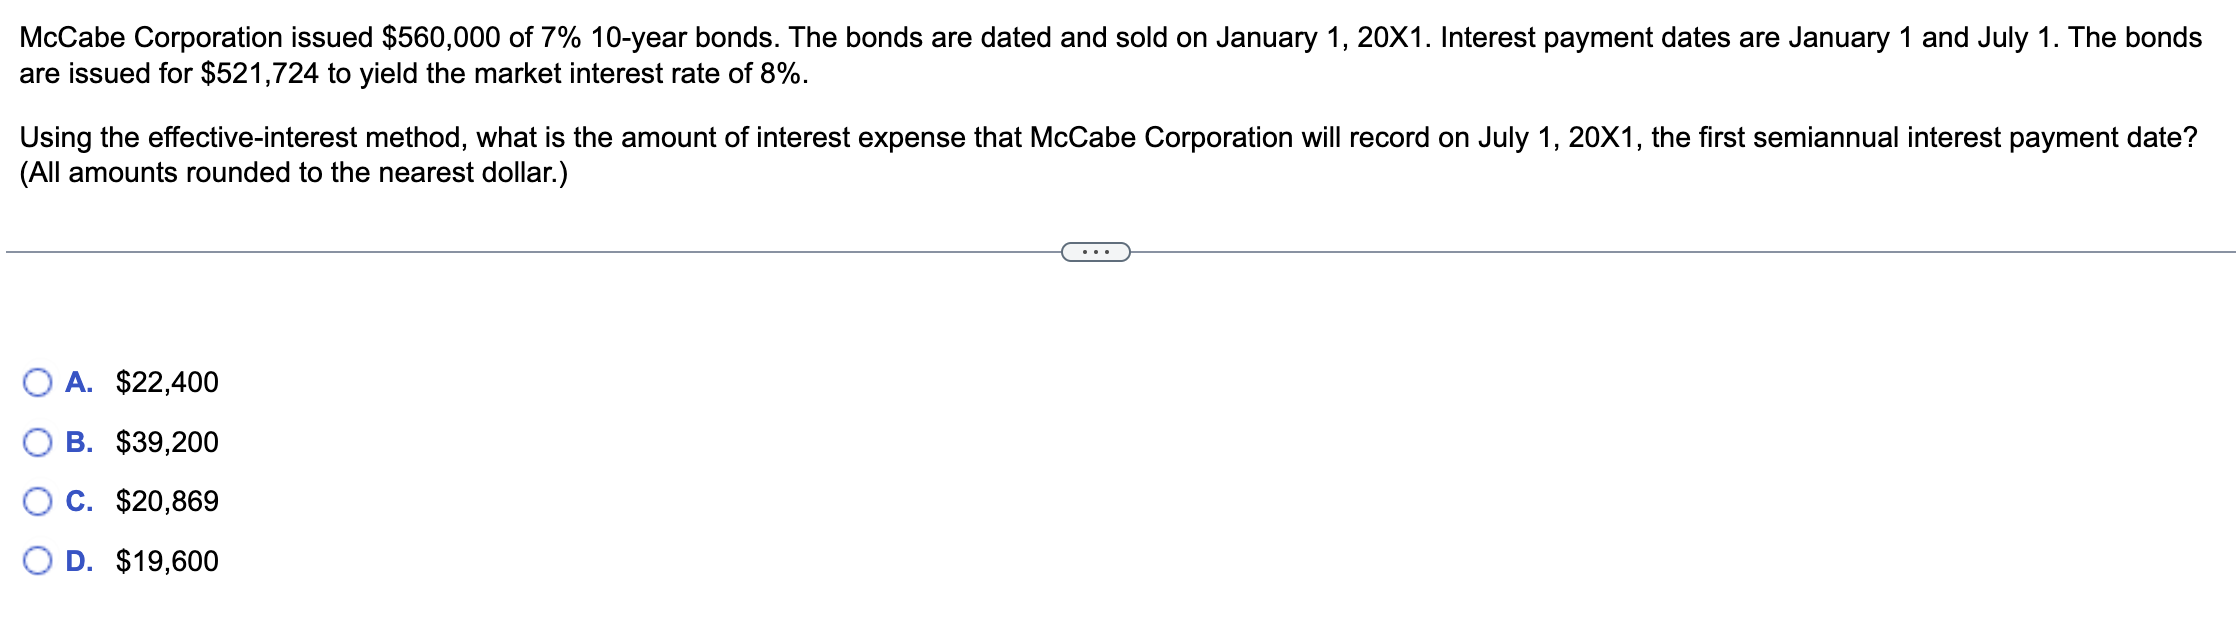 McCabe Corporation issued $560,000 of 7% 10-year bonds. The bonds are dated and sold on January 1, 20X1.